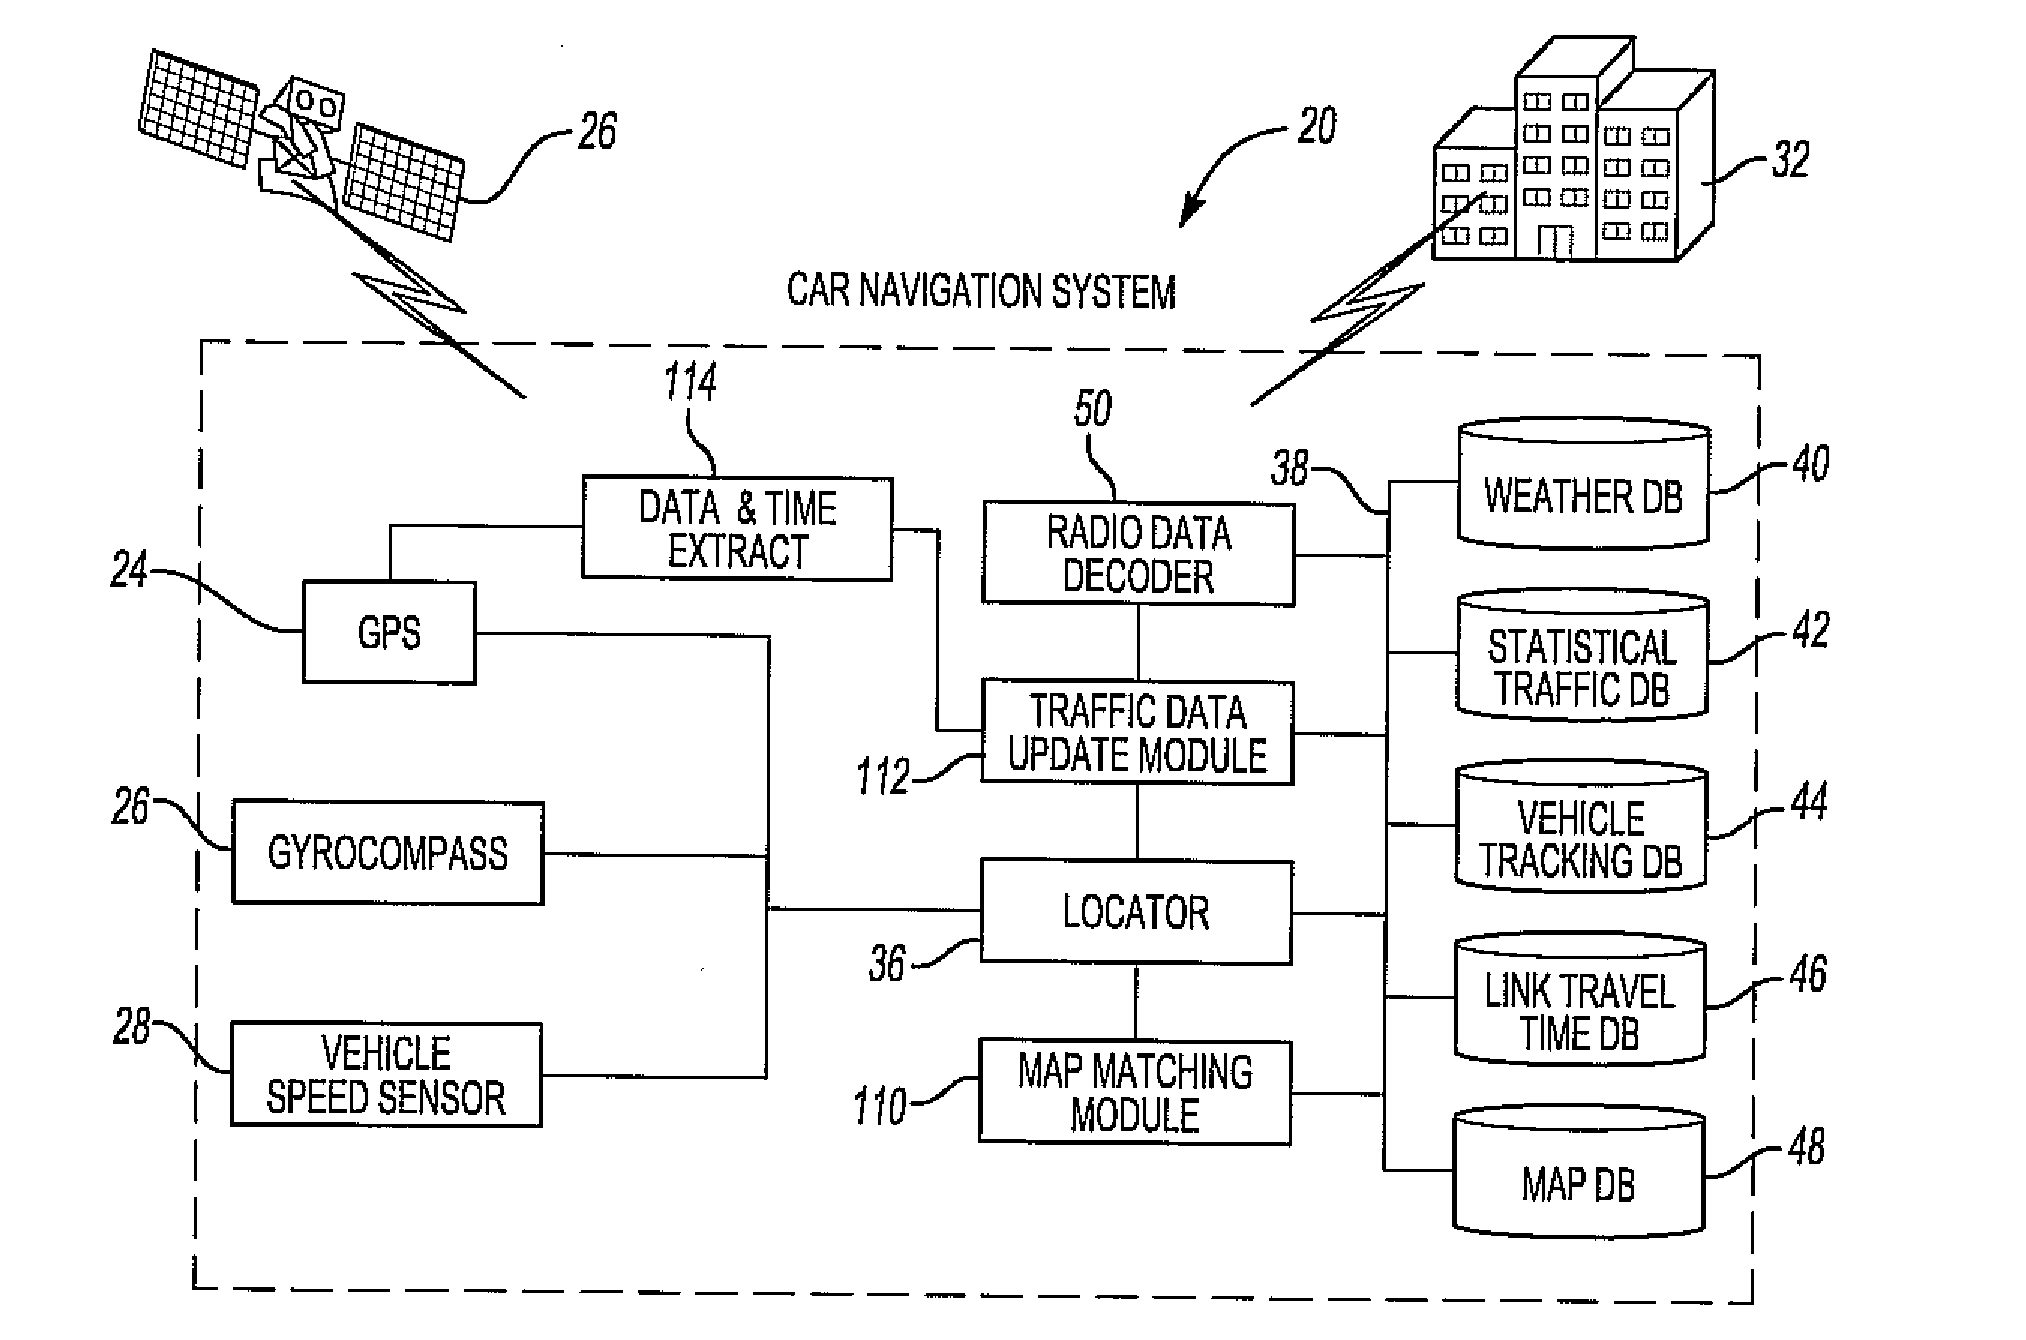 System and method for updating a statistical database in a vehicle navigation system